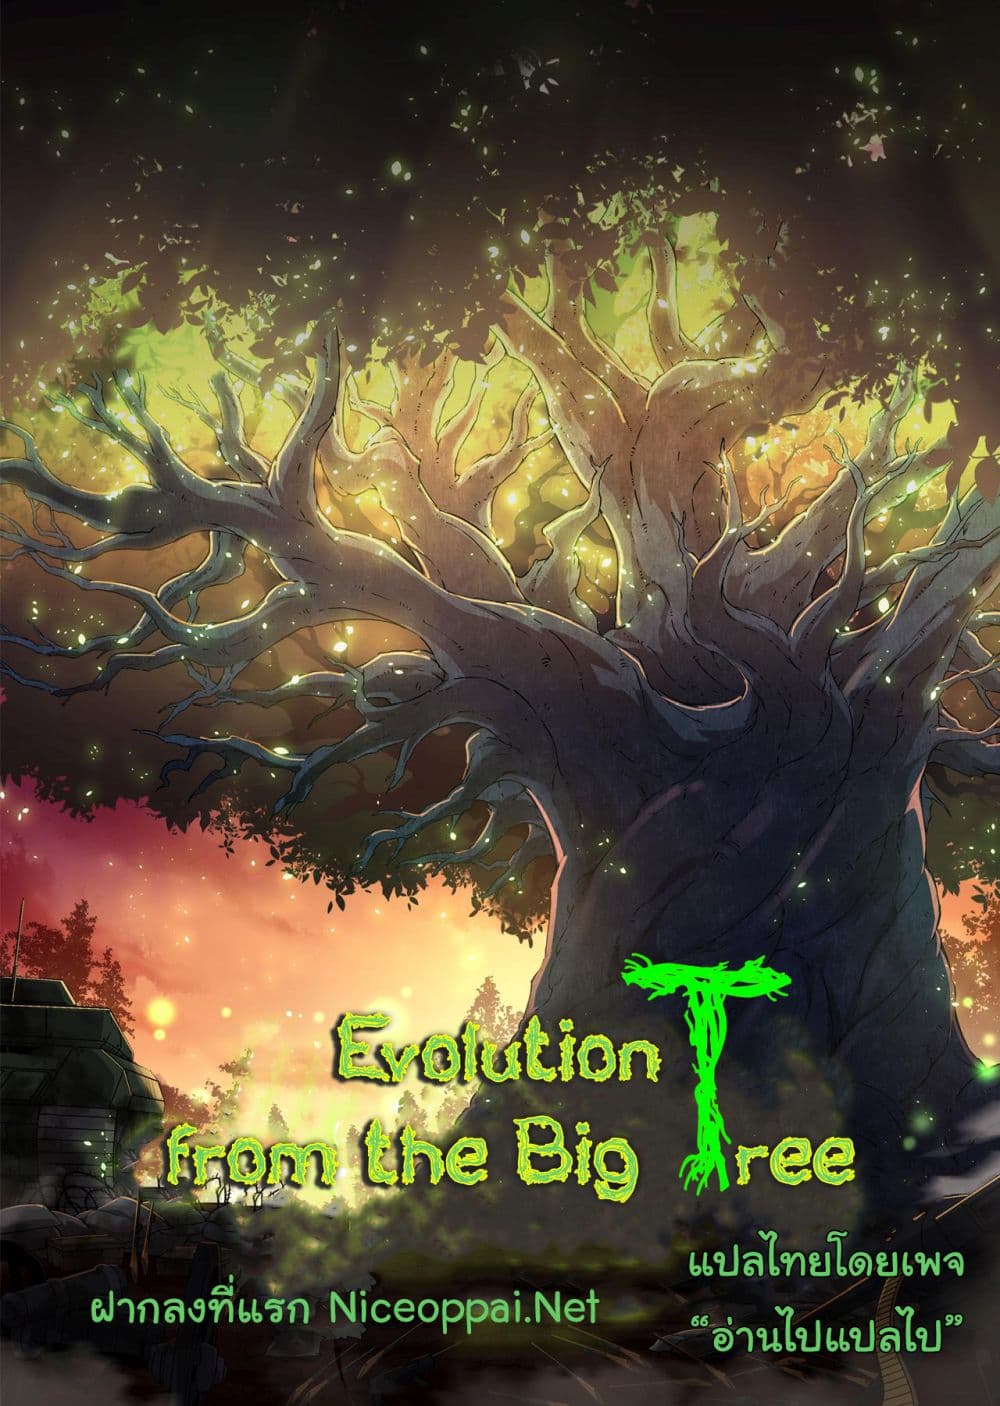 Evolution from the Big Tree 17 01